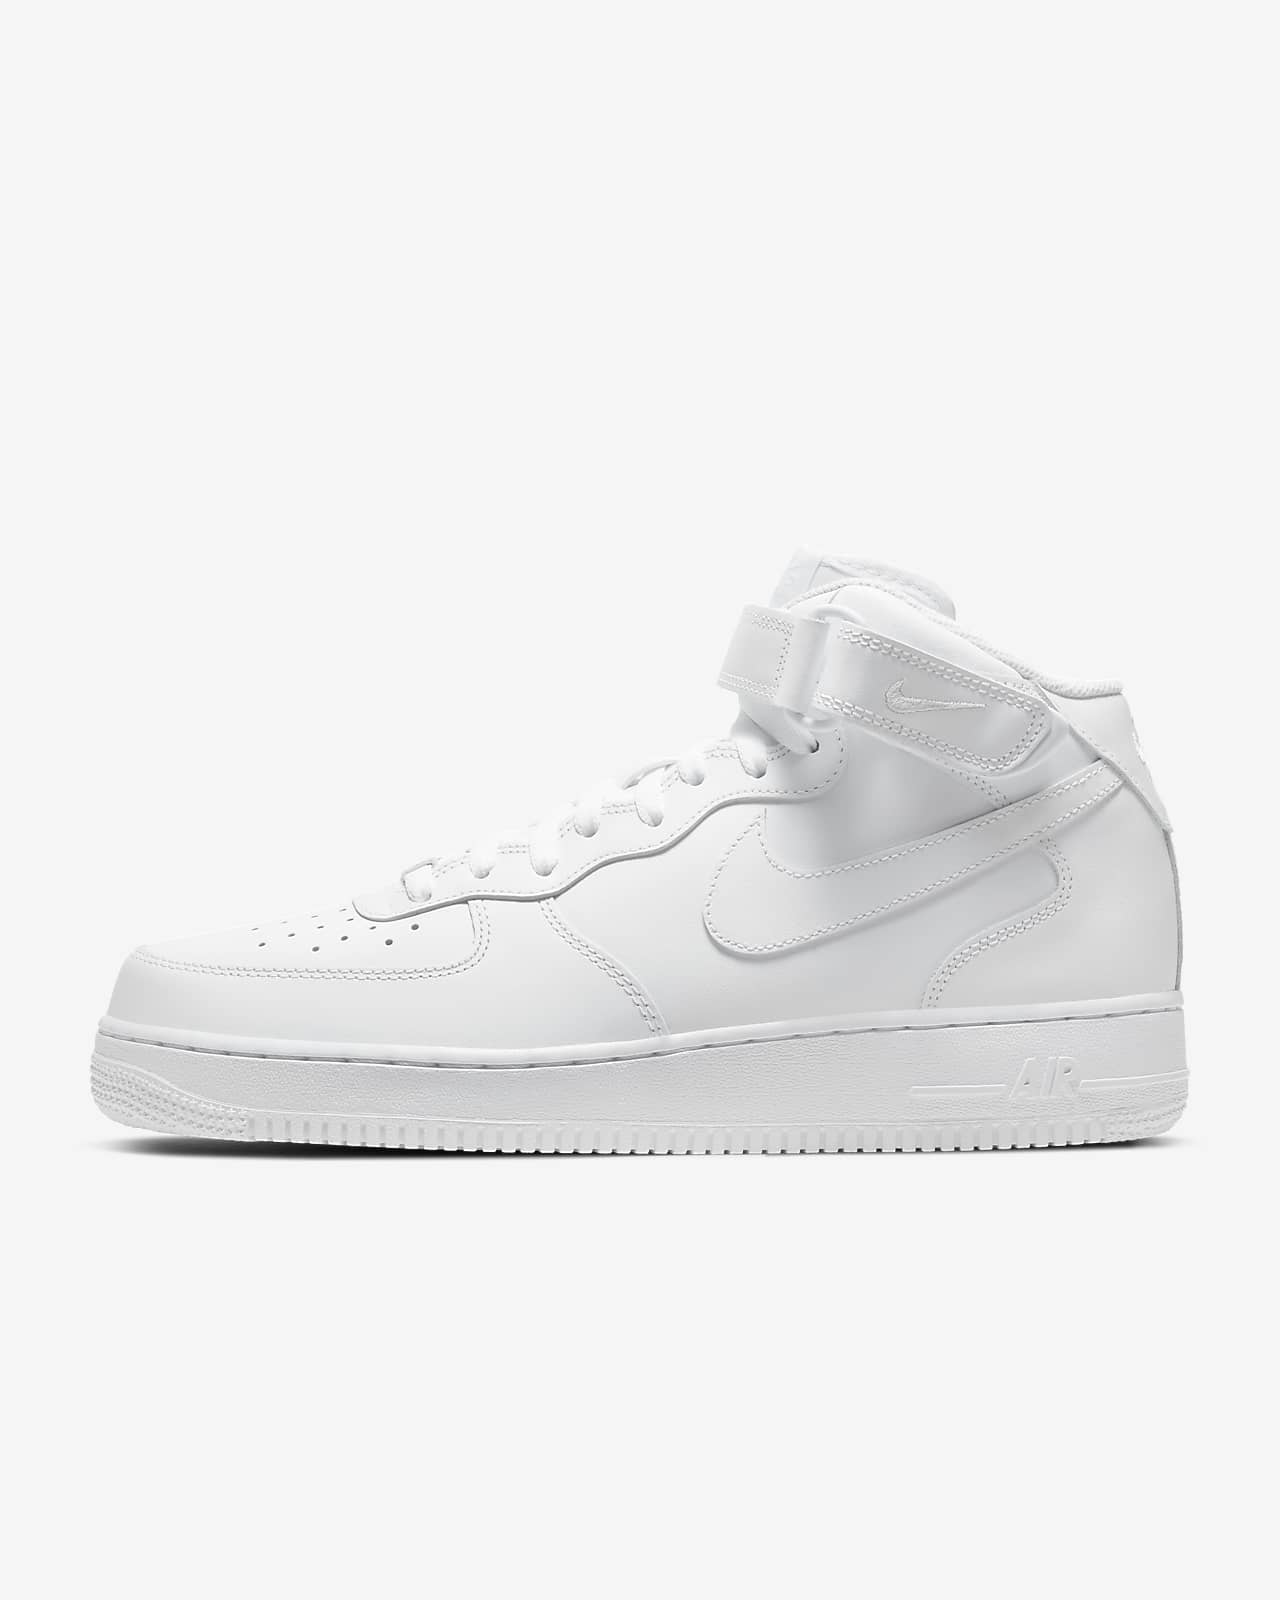 07 air force ones